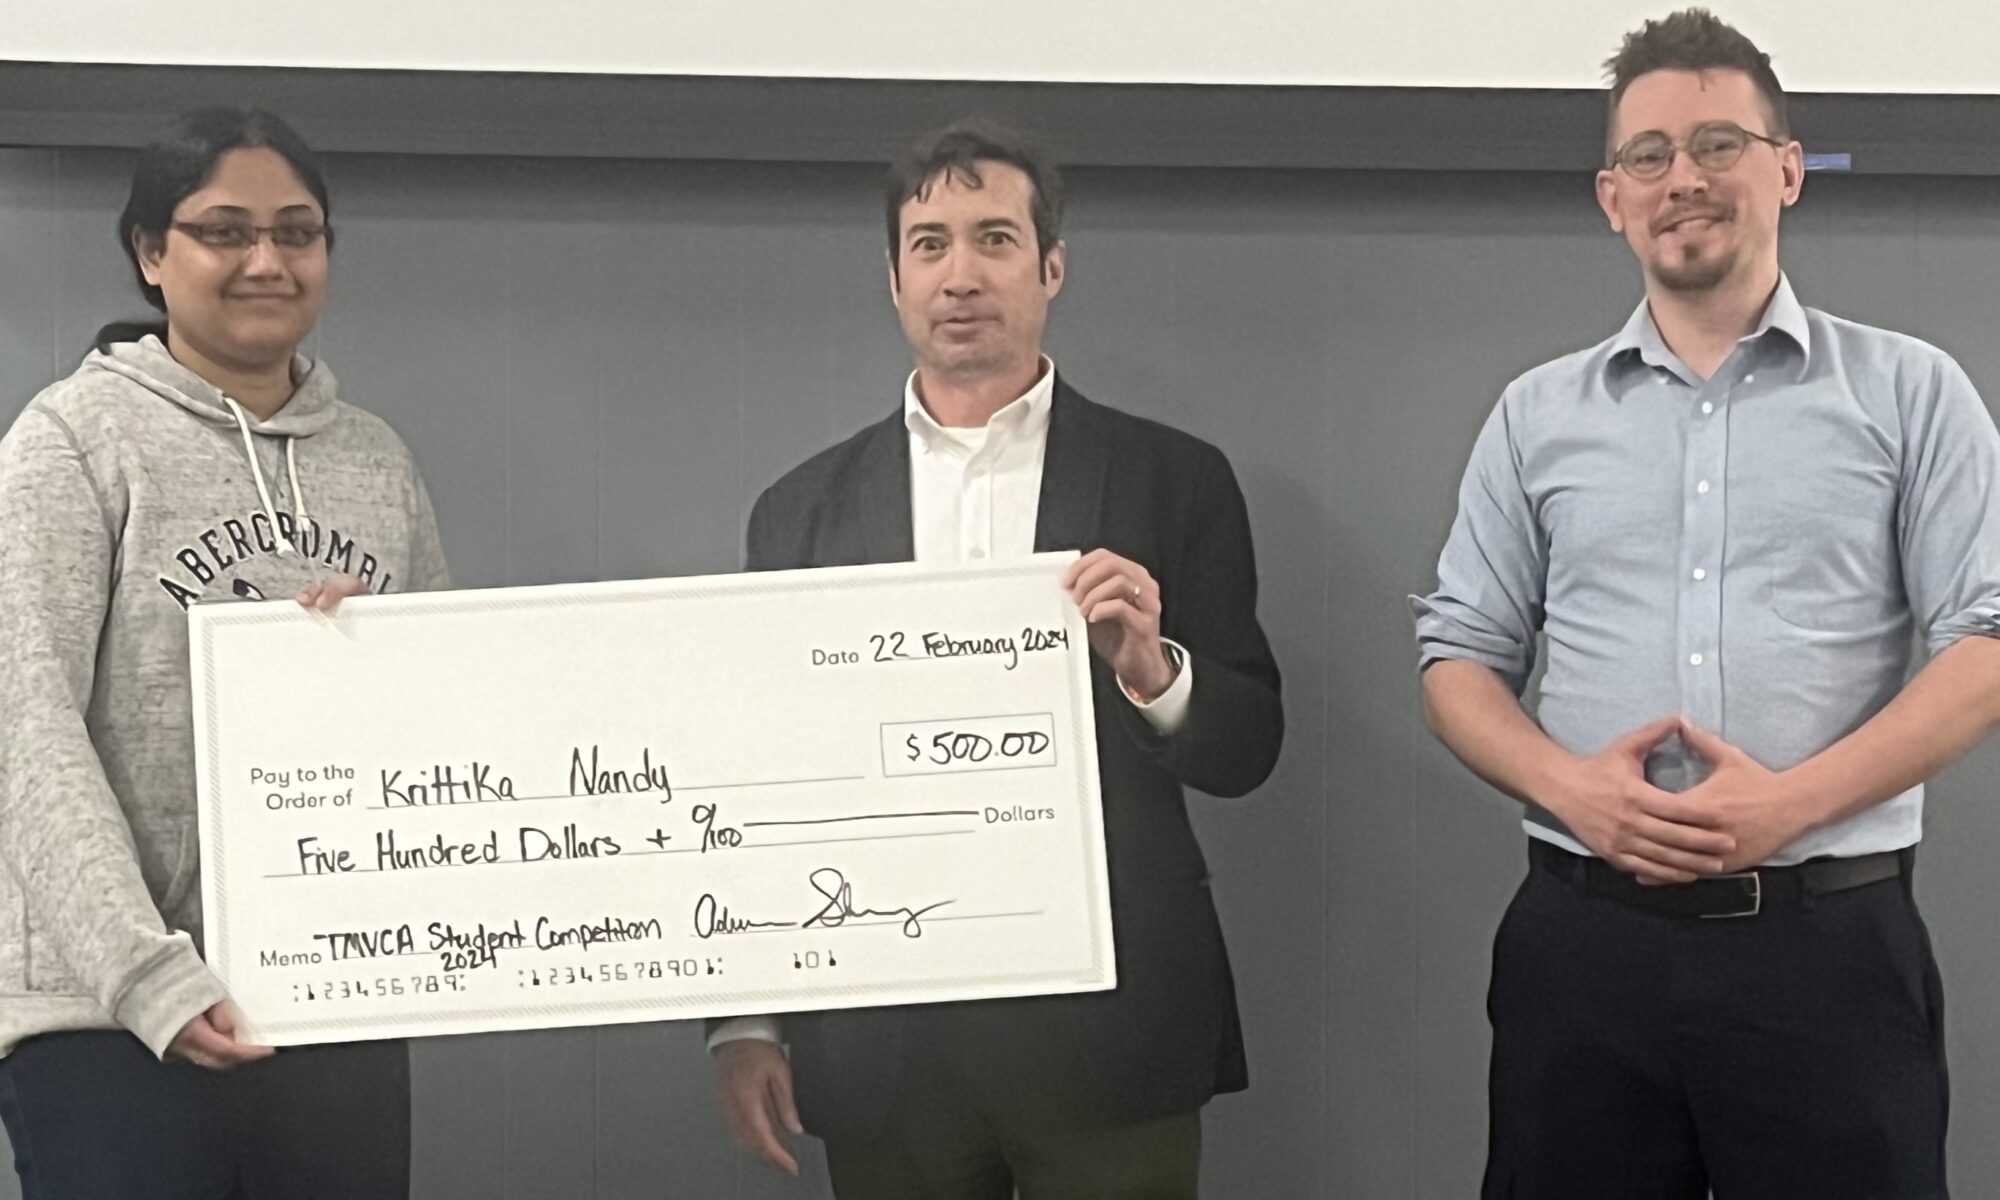 A female graduate student receives an oversized check for winning an oral presentation. Two men are also in the photo